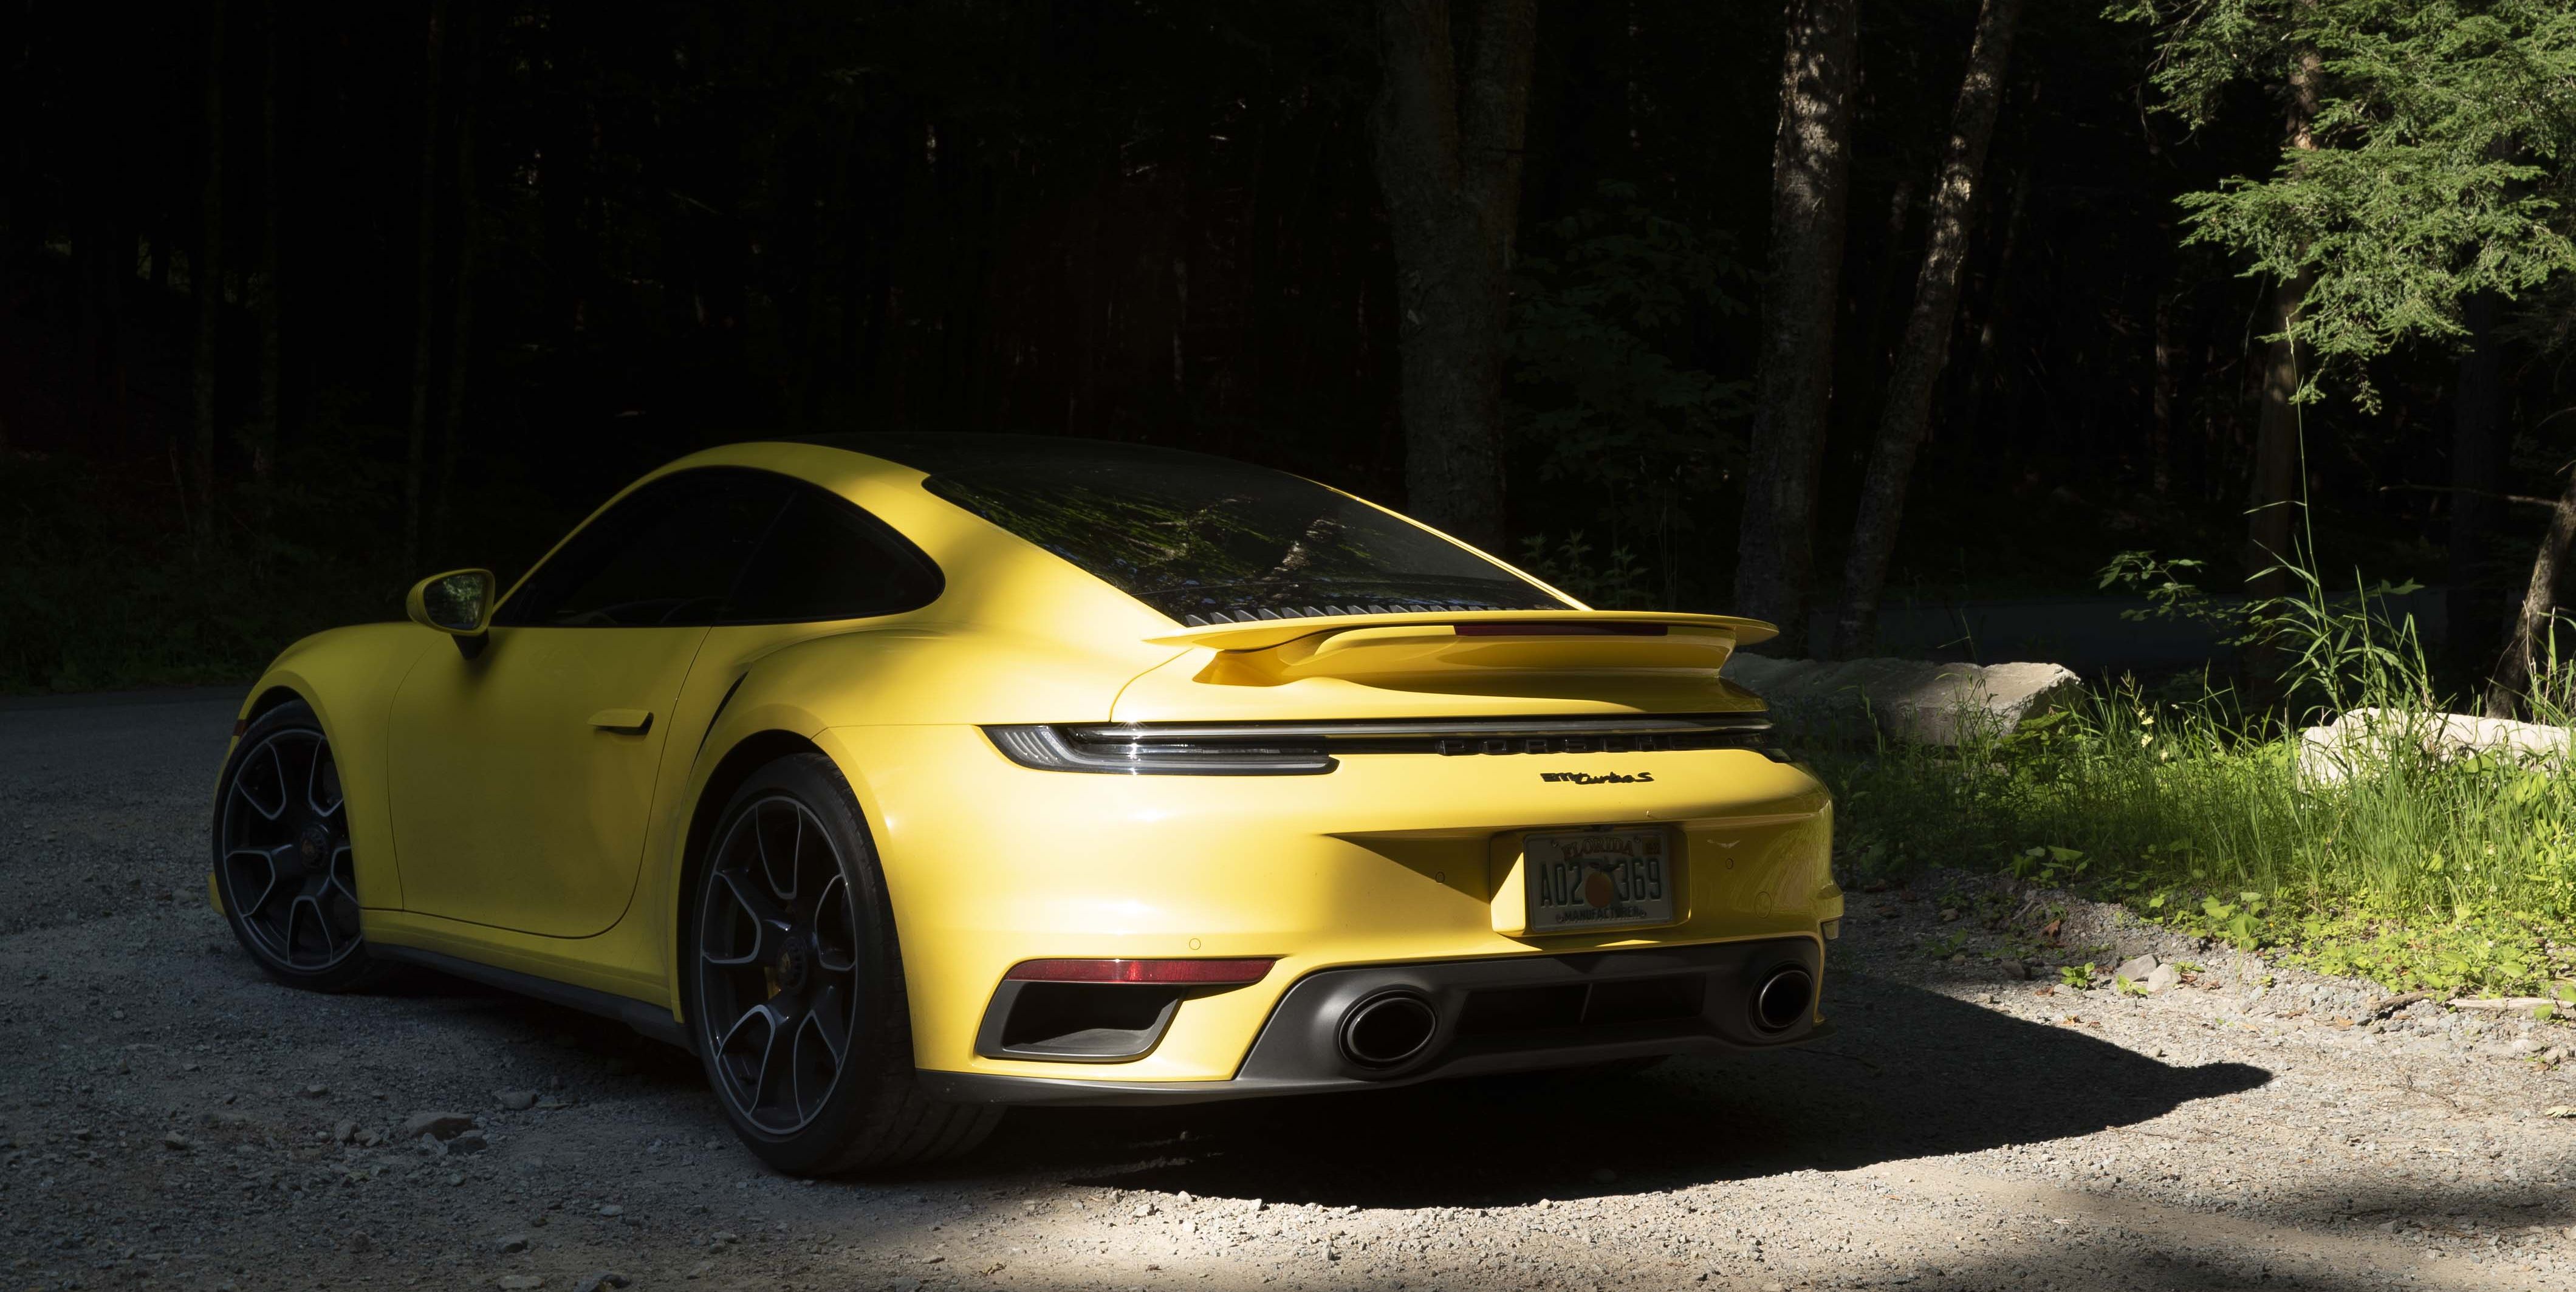 It's Hard to Love the Porsche 911 Turbo S When the GT3 Exists